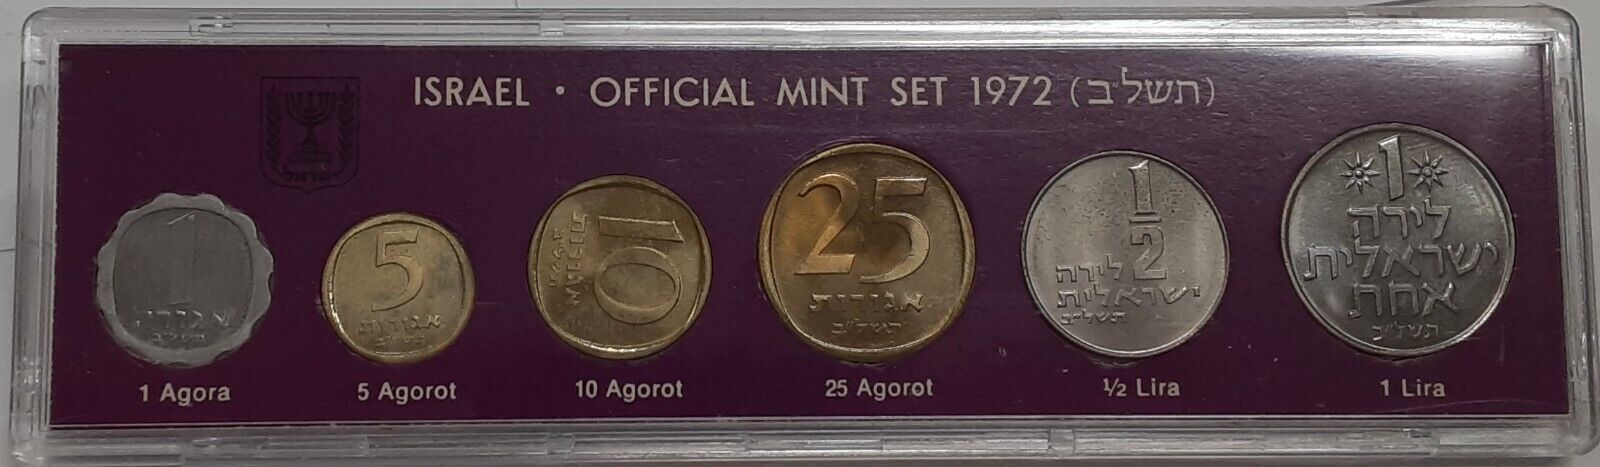 1972 Israel 6 Coin UNC Official Mint Set Complete with OGP